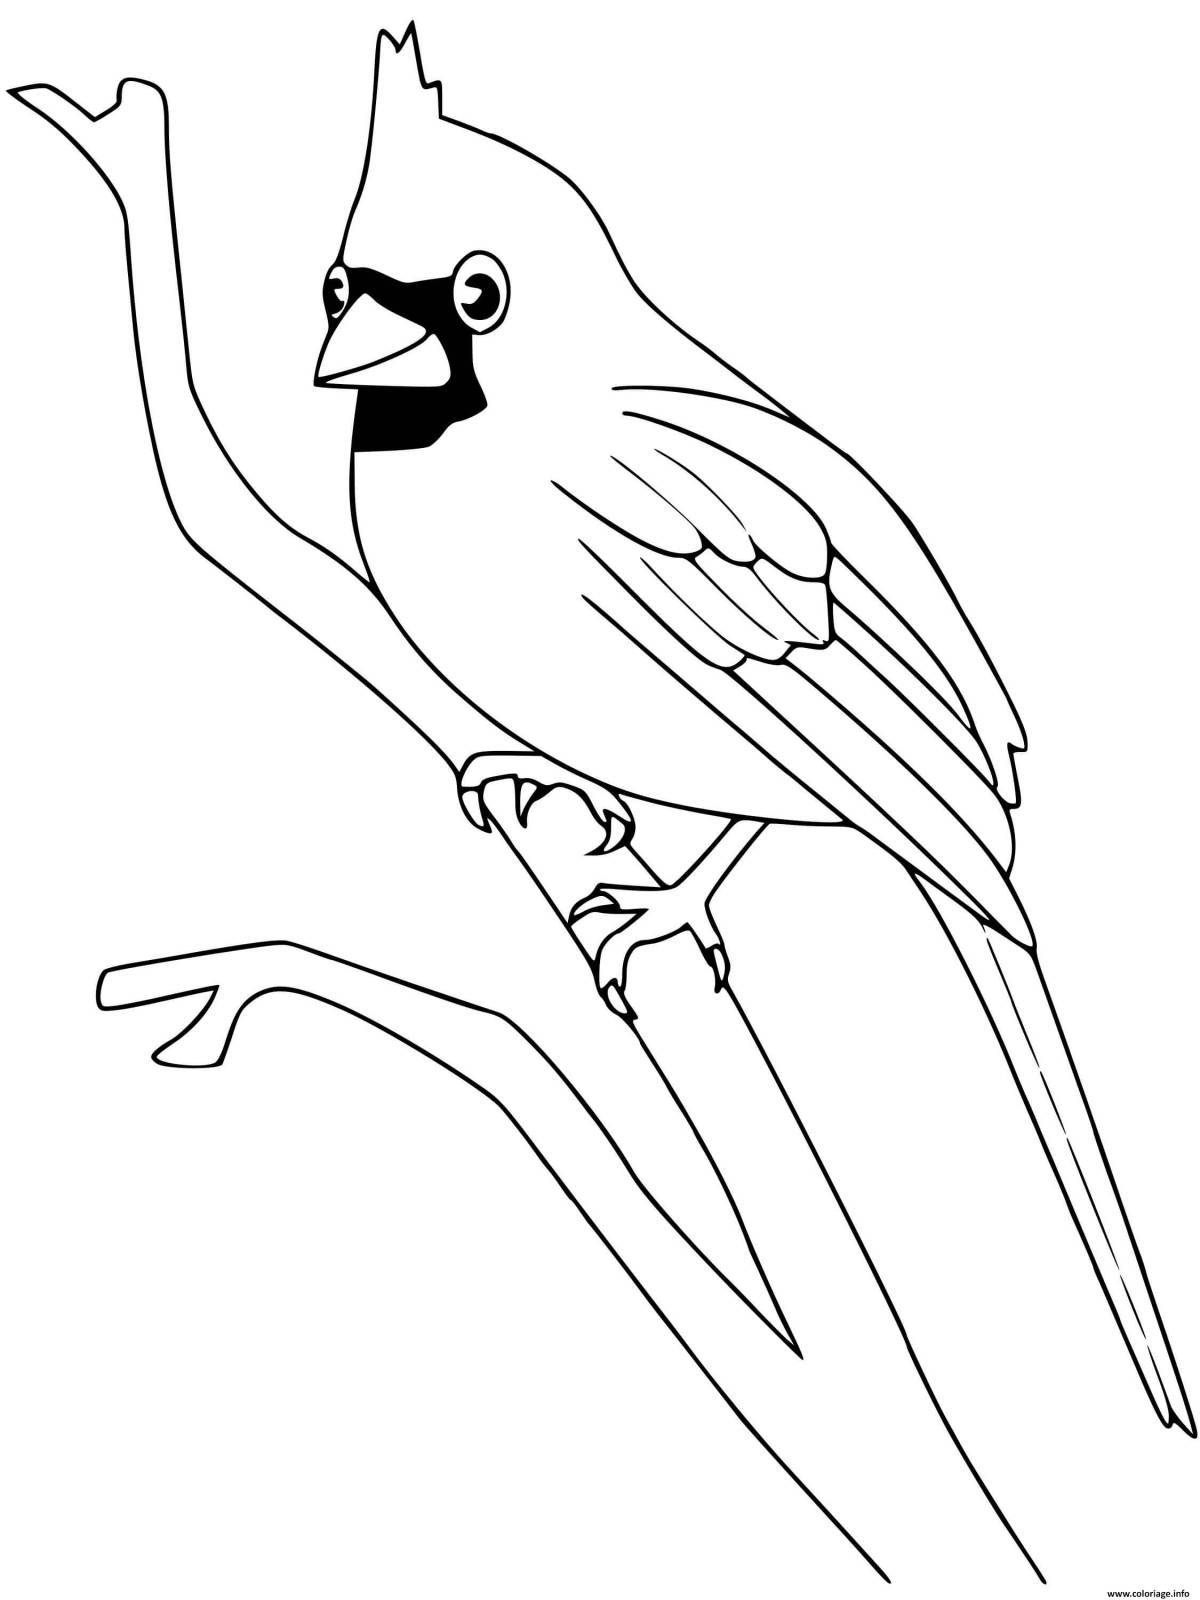 Coloring page charming waxwing